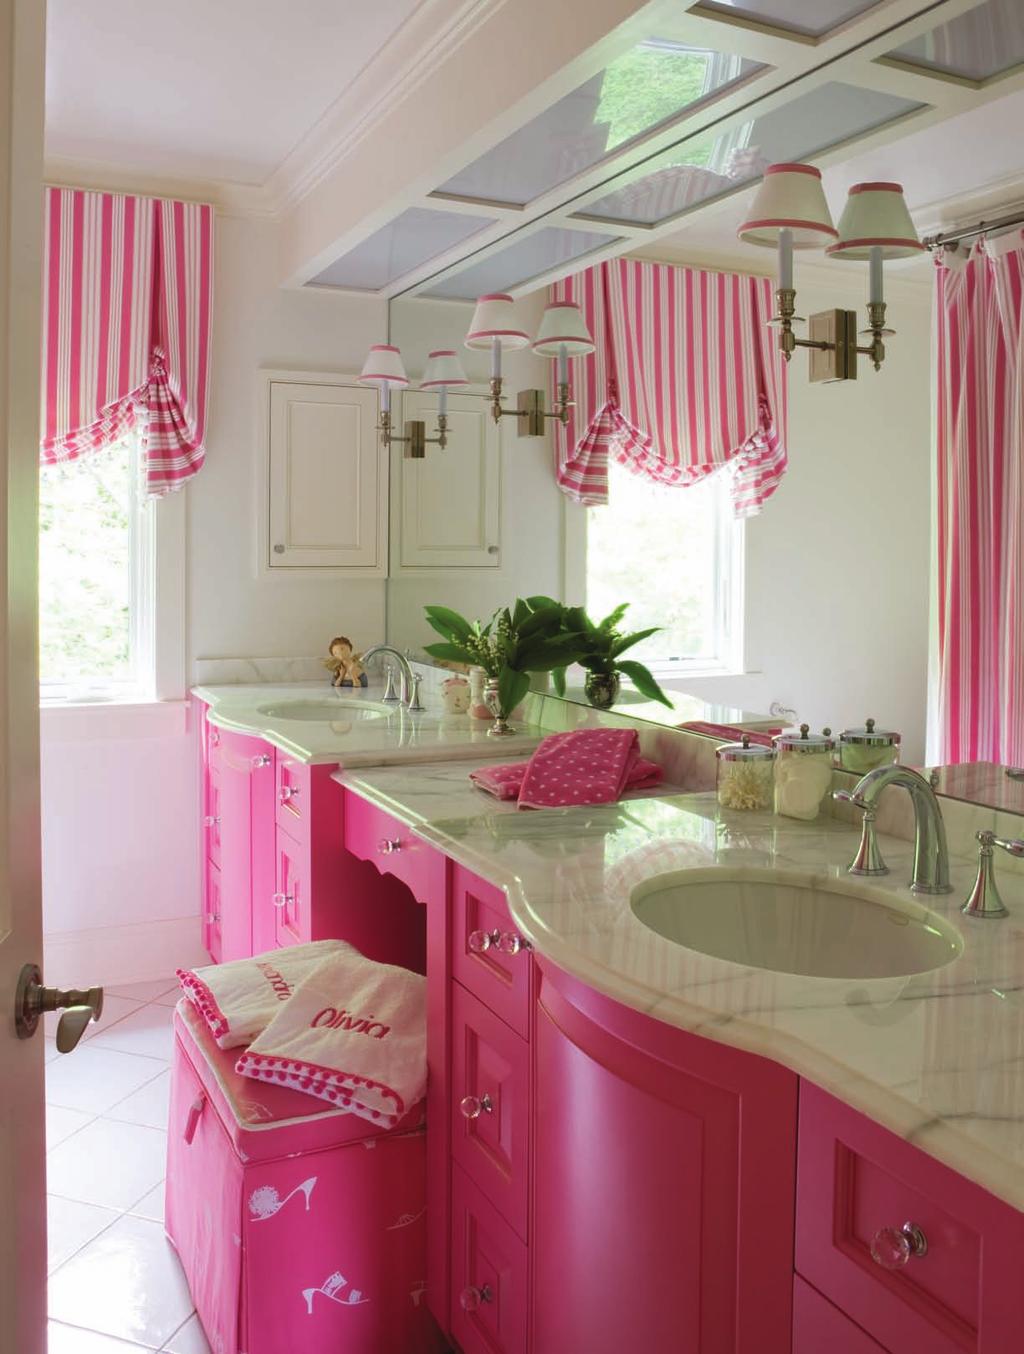 A fun departure from the dominant color scheme, this bright pink bathroom features such details as mirror mounted sconces, crystal cabinet knobs, bow front vanities with a marble top, and a whimsical